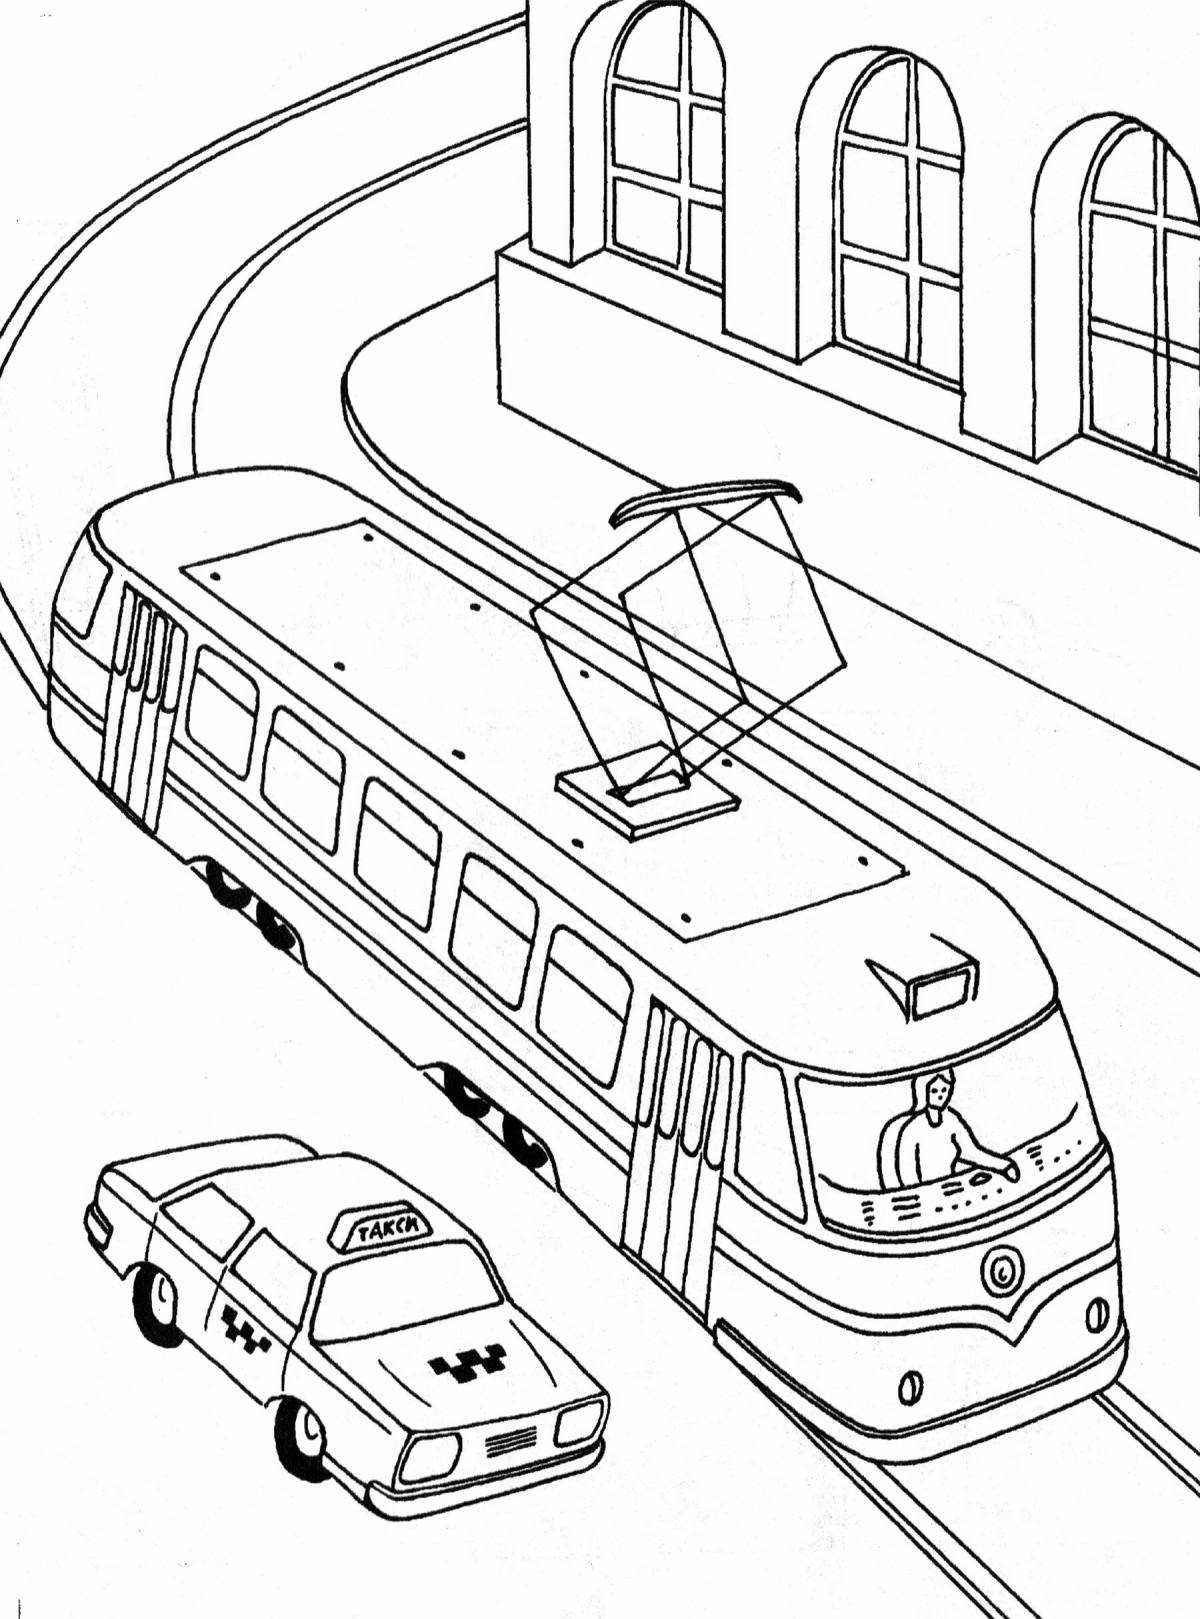 Coloring page magical public transport